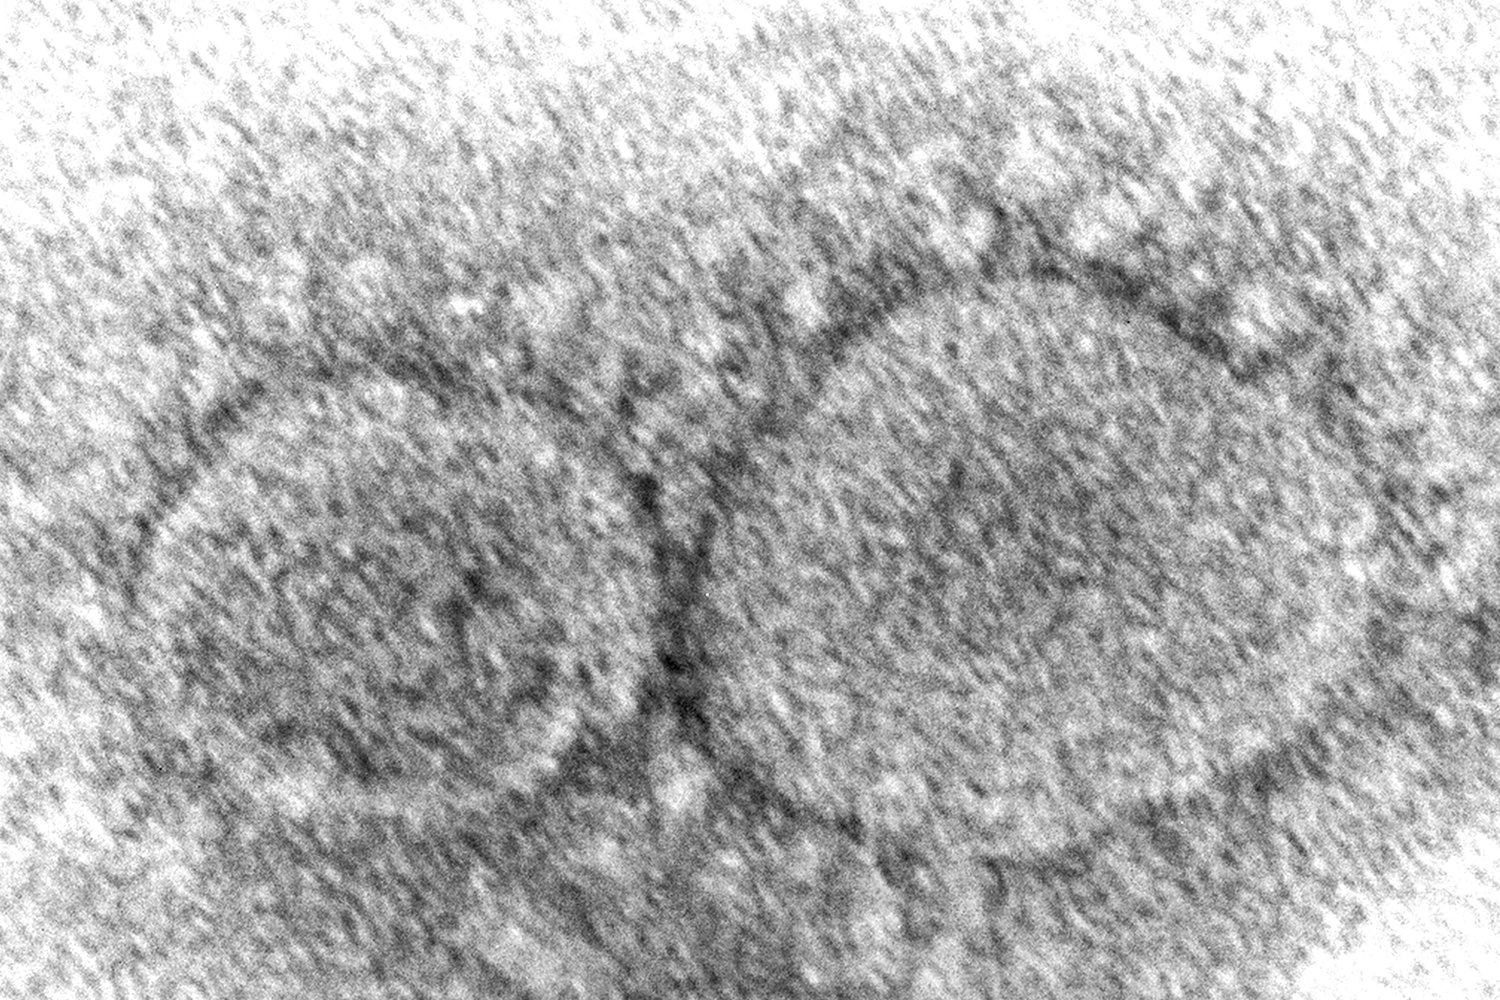 This 2020 electron microscope image made available by the Centers for Disease Control and Prevention shows SARS-CoV-2 virus particles, which cause COVID-19. A crucial question has eluded governments and health agencies since the COVID-19 pandemic began: Did the virus originate in animals or leak from a Chinese lab? Now, the U.S. Department of Energy has assessed with “low confidence” that it began with a lab leak although others in the U.S. intelligence community disagree.